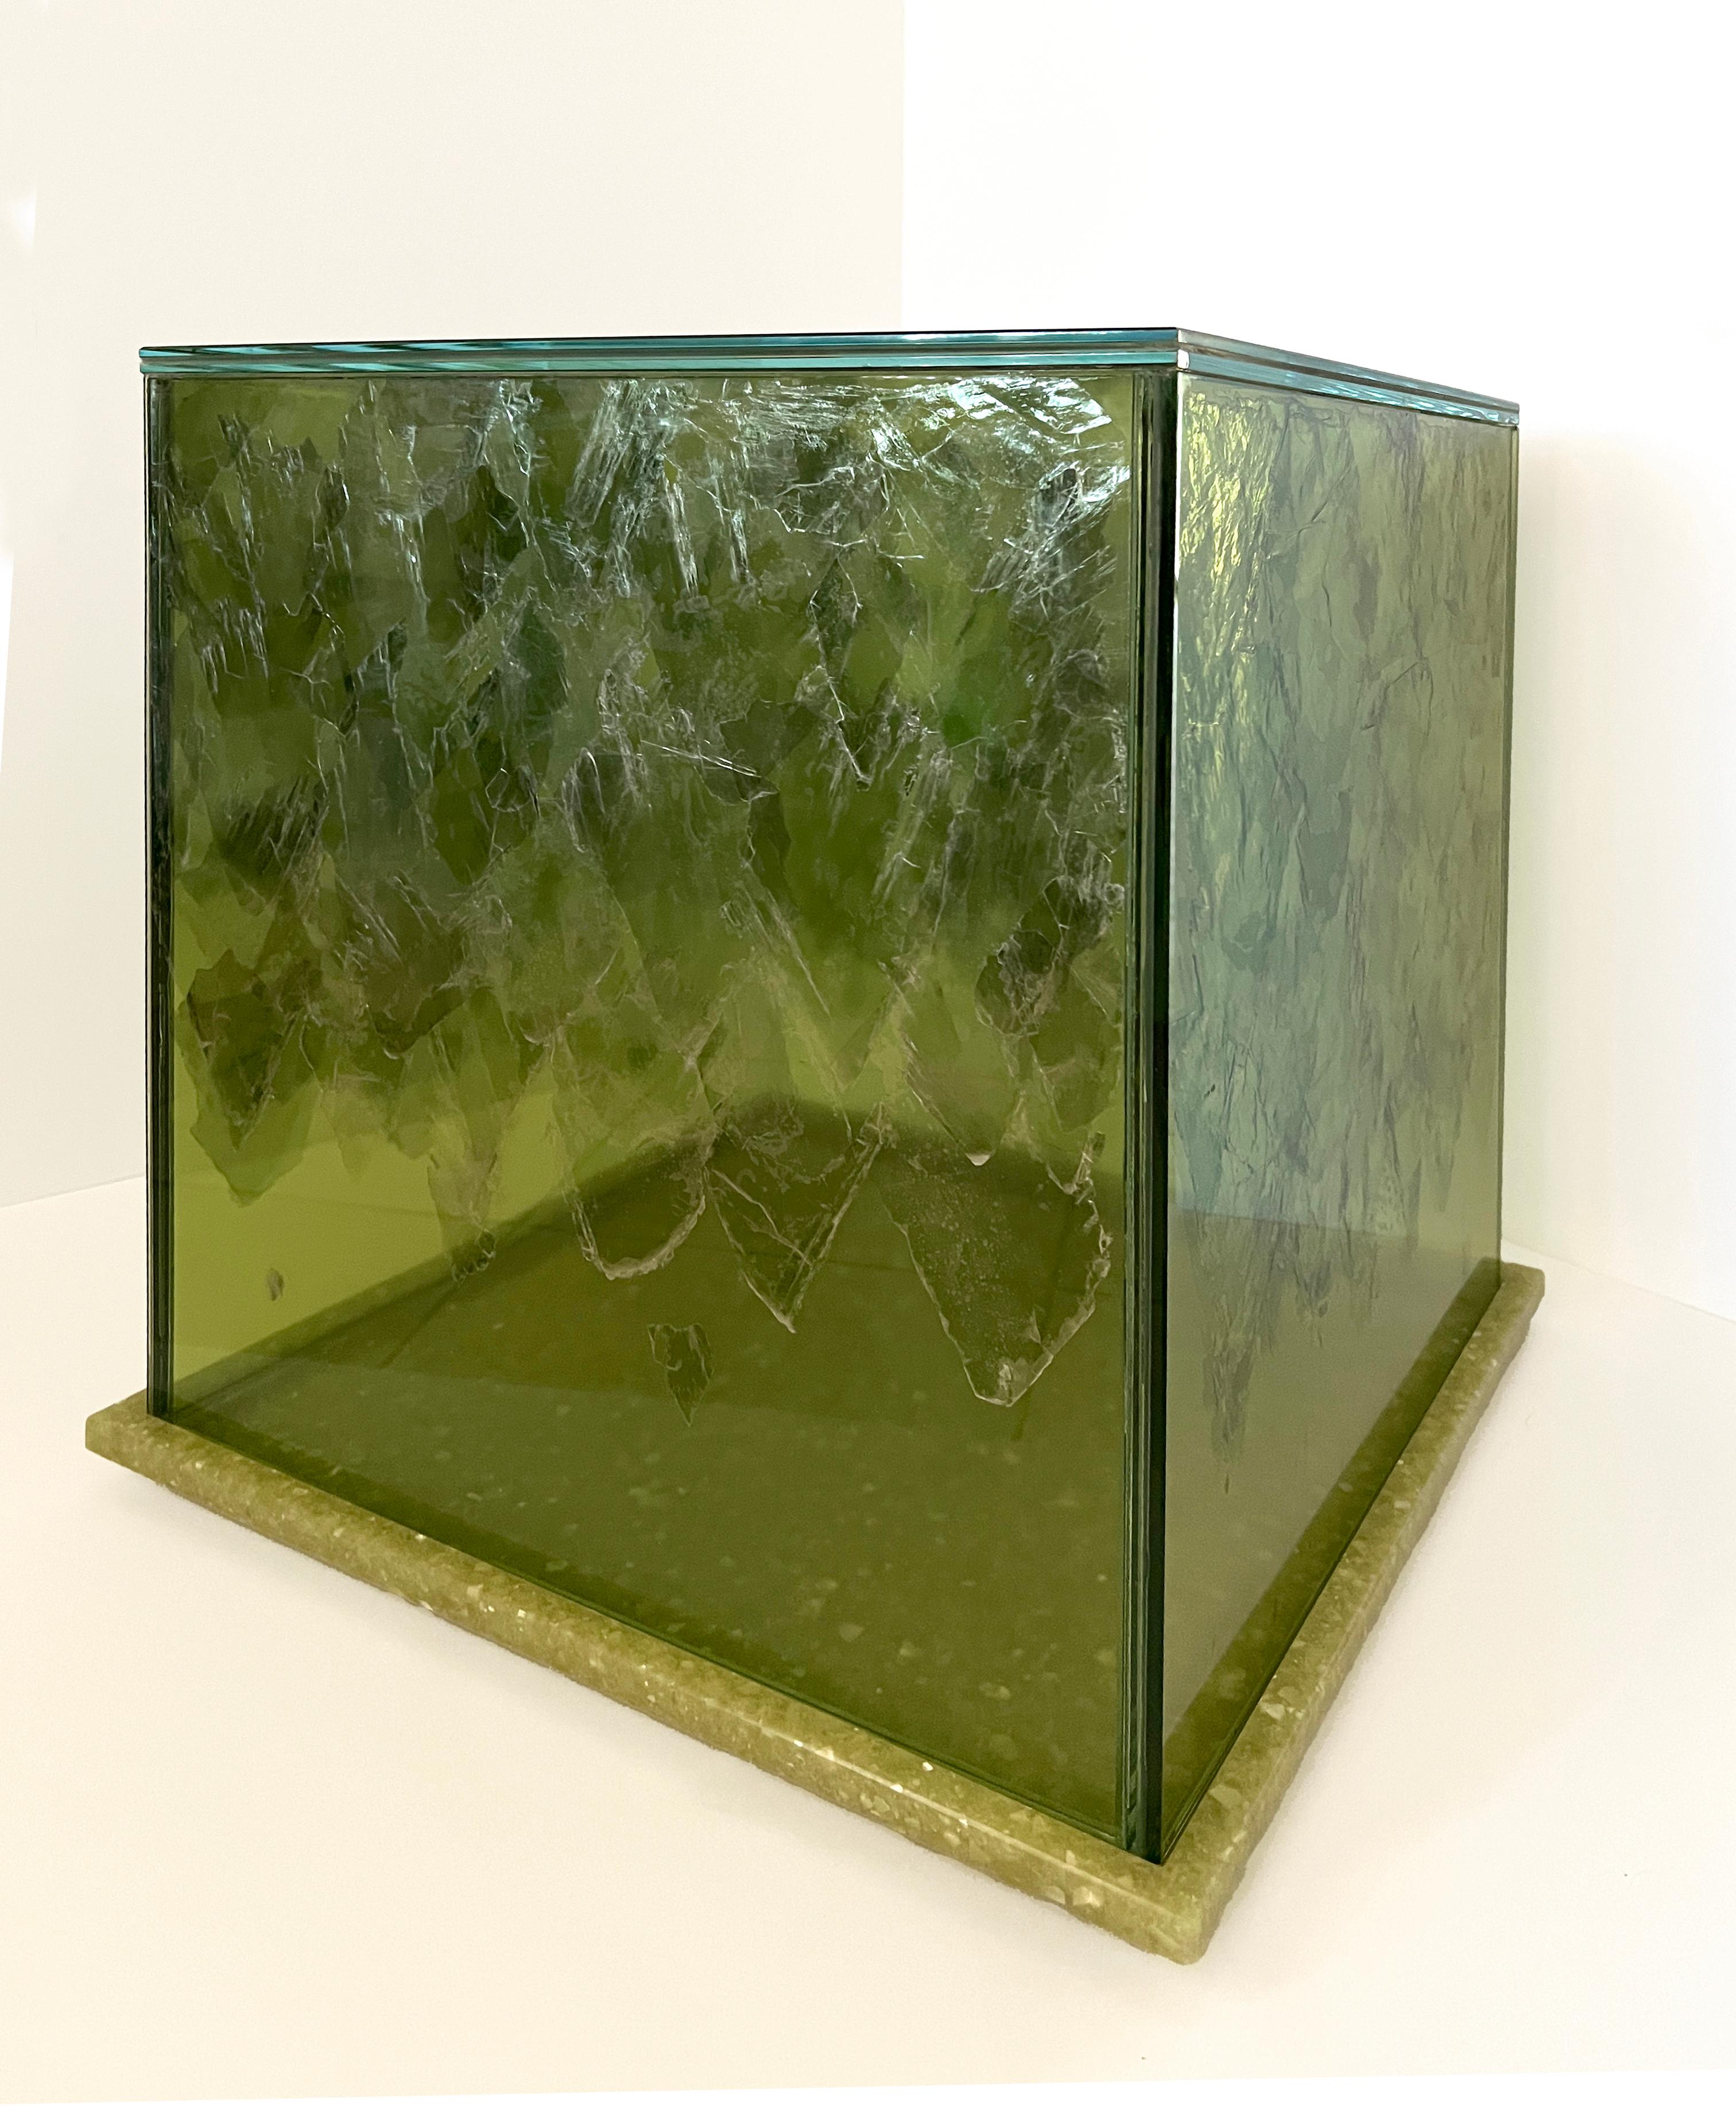 Hand-Crafted CAUSEWAY SIDE TABLE (GREEN) by Micah Heimlich